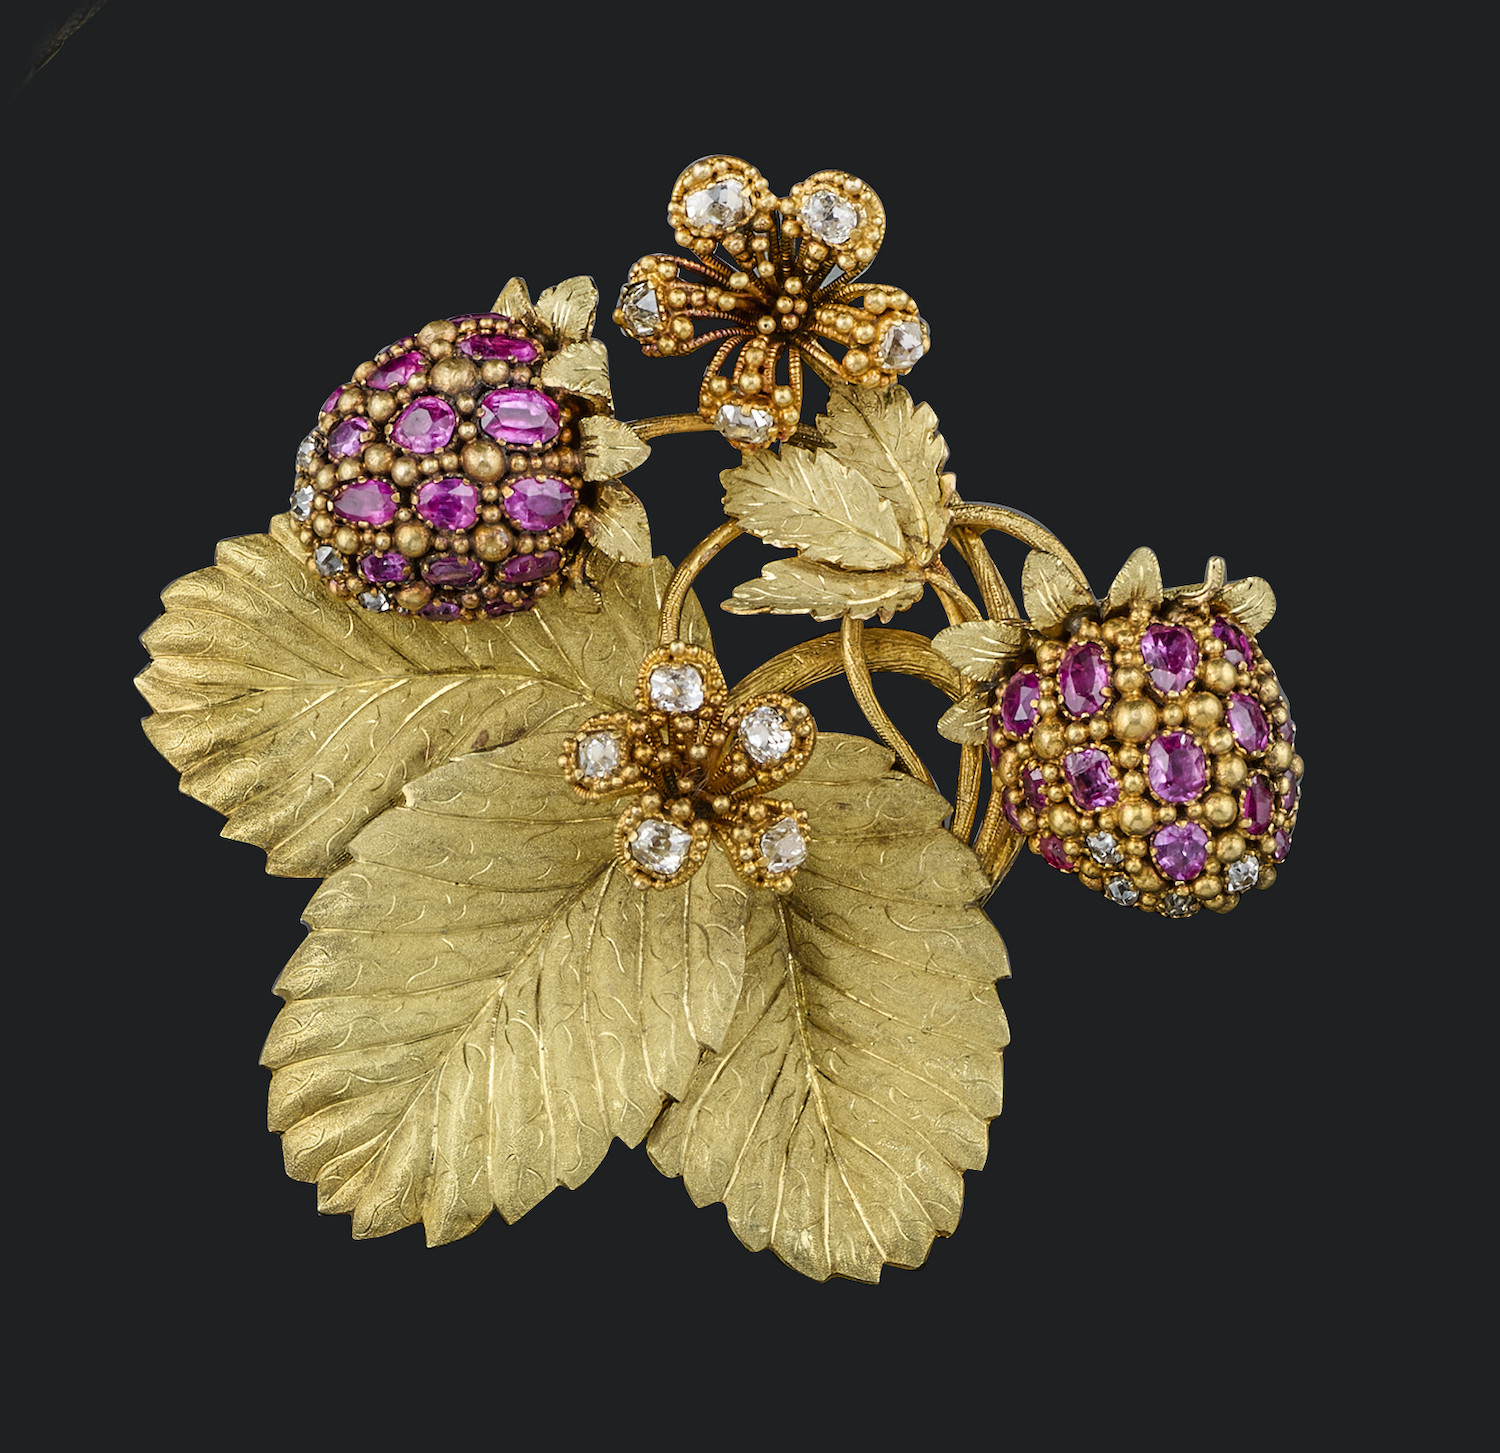 A gold, ruby and diamond brooch, 1830s